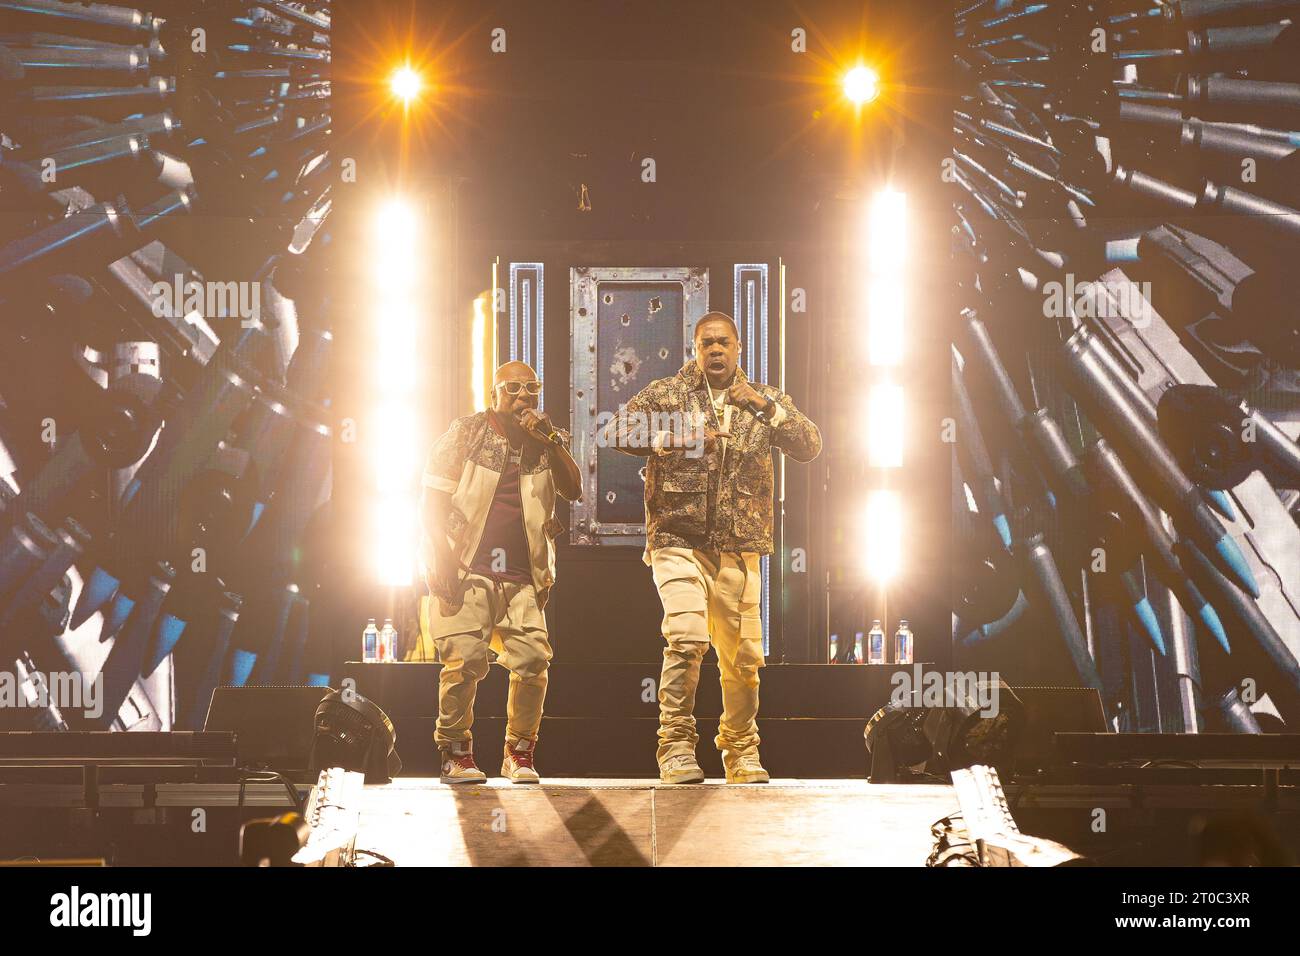 50 cent + Busta Rhymes + Jeremih @ Rogers Arena, Vancouver - 8 septembre 2023 Banque D'Images